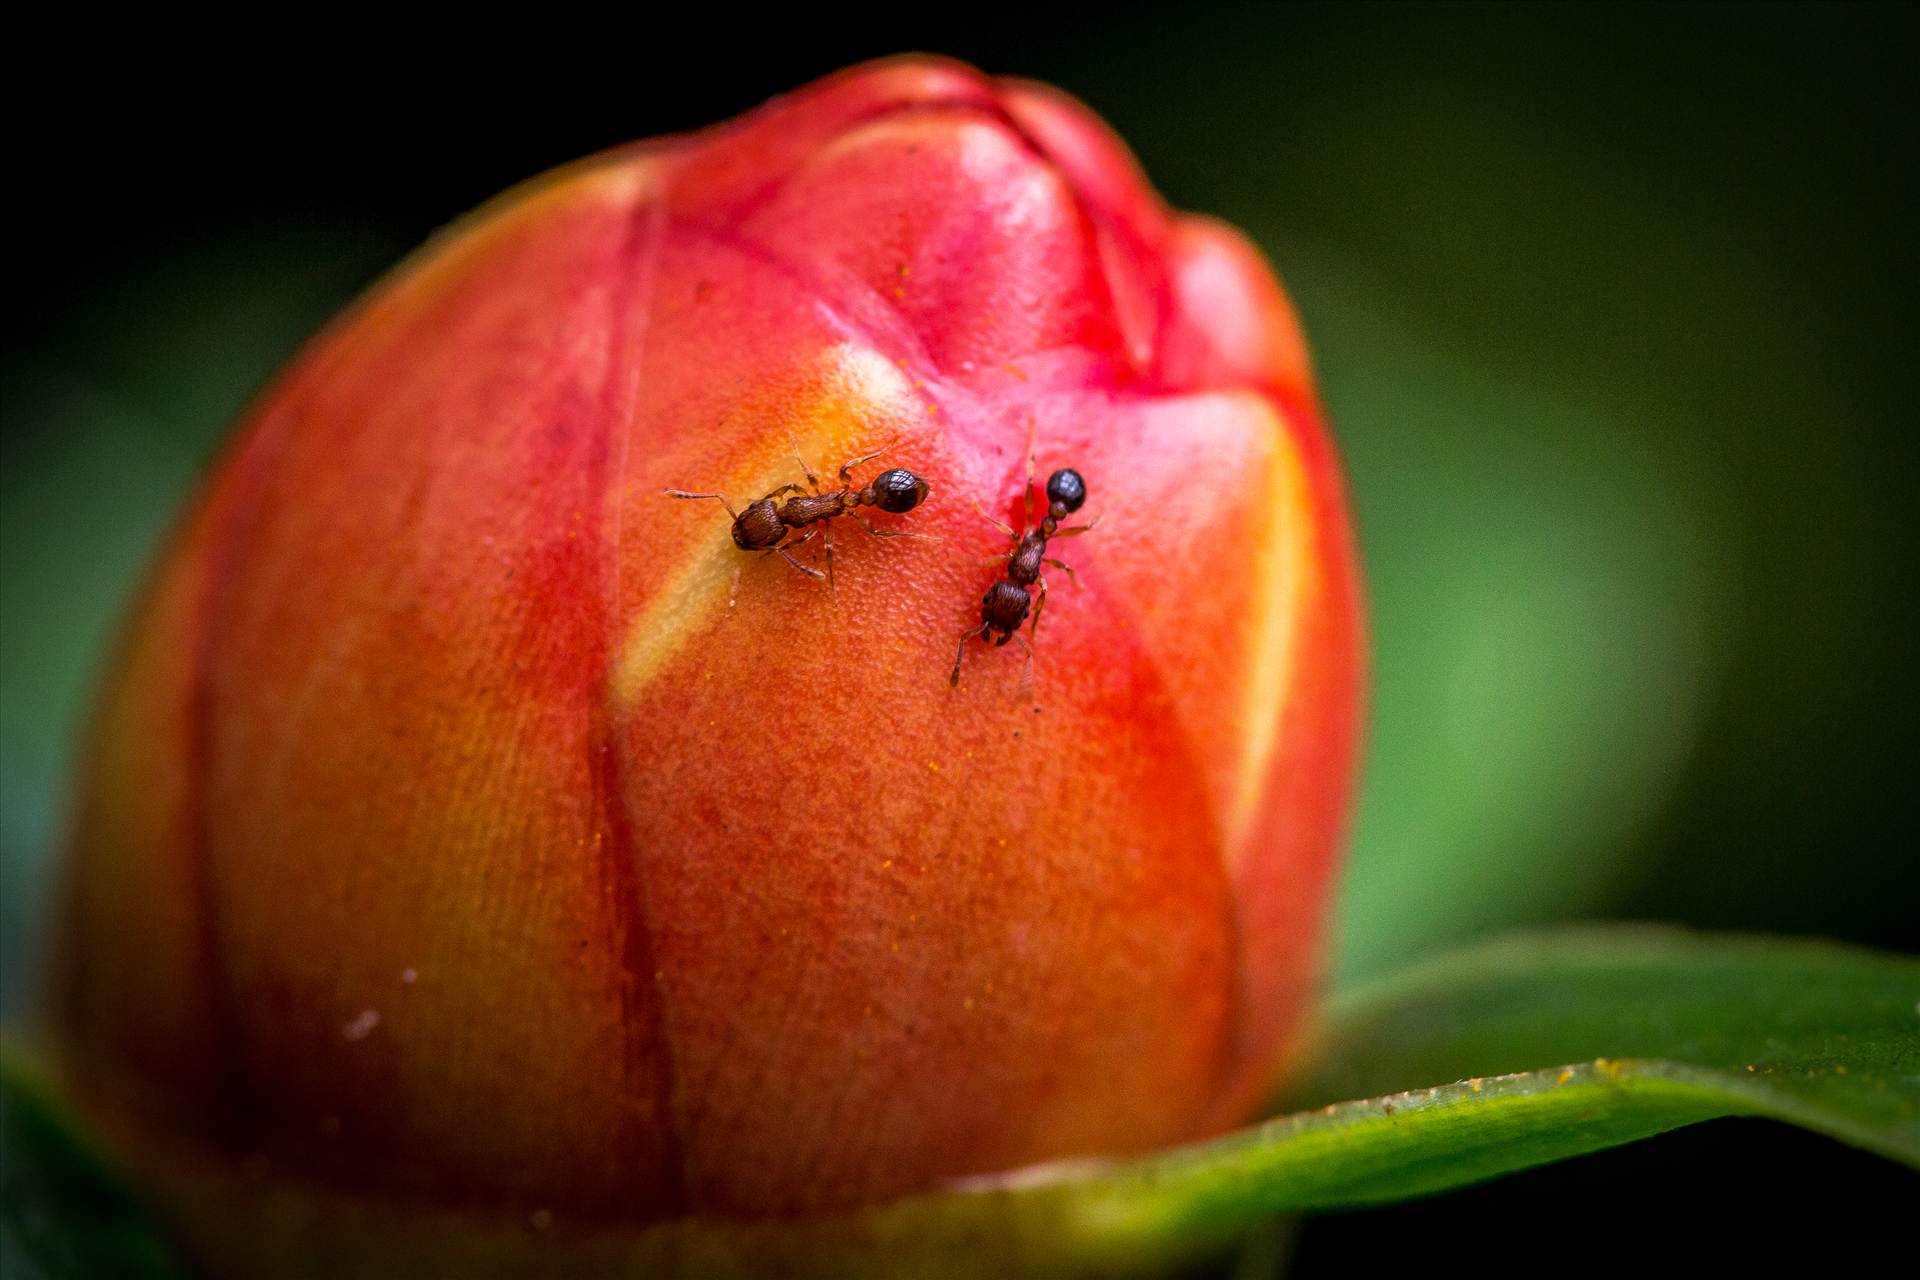 Ant Activity A pair of tiny ants crawling on a small flower bud. by Scott Smith Photos